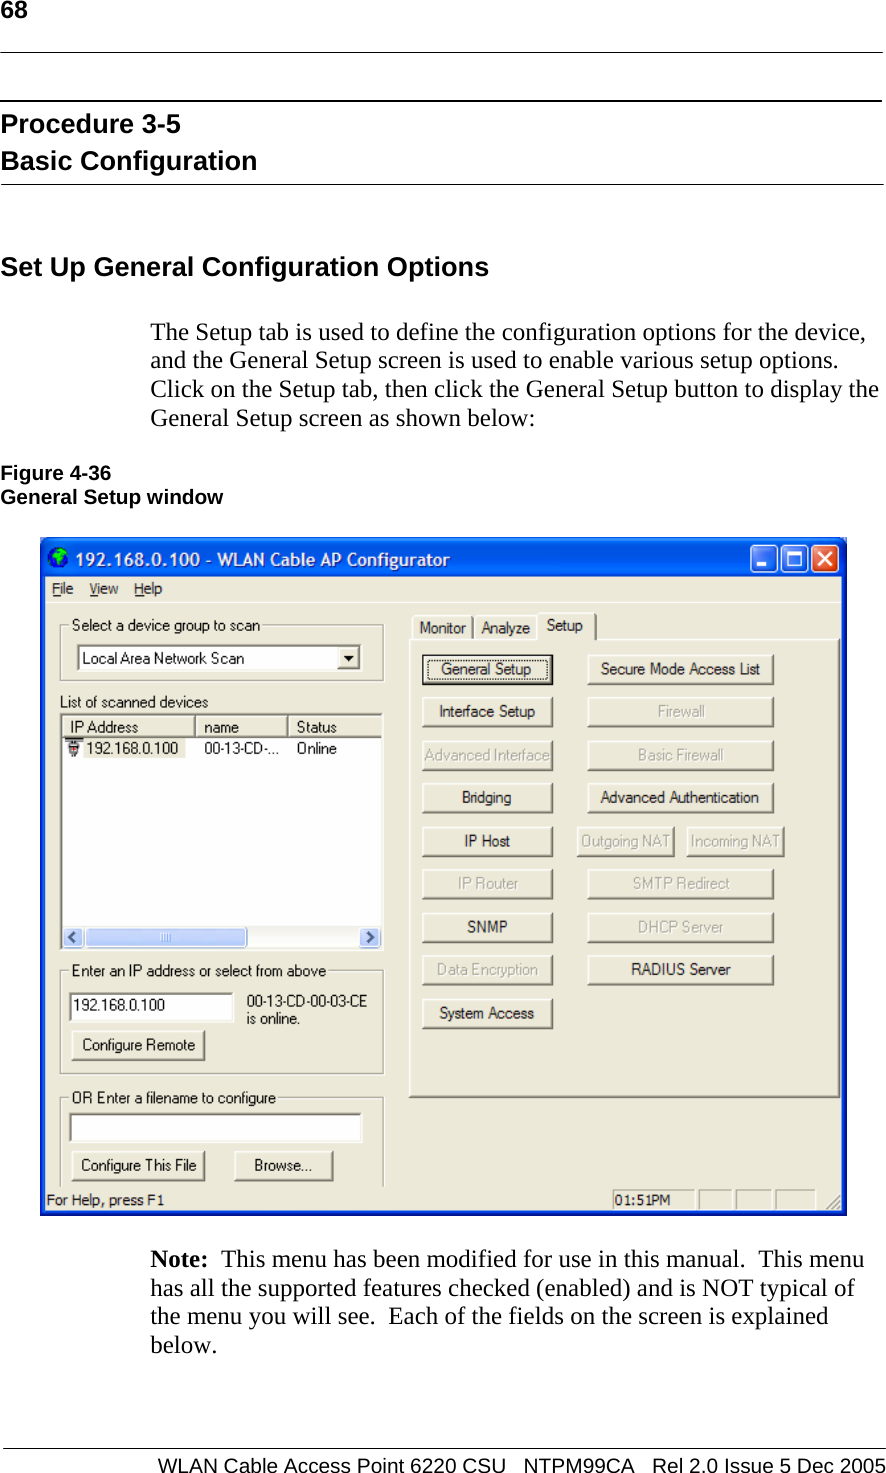   68  WLAN Cable Access Point 6220 CSU   NTPM99CA   Rel 2.0 Issue 5 Dec 2005 Procedure 3-5 Basic Configuration   Set Up General Configuration Options  The Setup tab is used to define the configuration options for the device, and the General Setup screen is used to enable various setup options.  Click on the Setup tab, then click the General Setup button to display the General Setup screen as shown below:  Figure 4-36 General Setup window    Note:  This menu has been modified for use in this manual.  This menu has all the supported features checked (enabled) and is NOT typical of the menu you will see.  Each of the fields on the screen is explained below.  